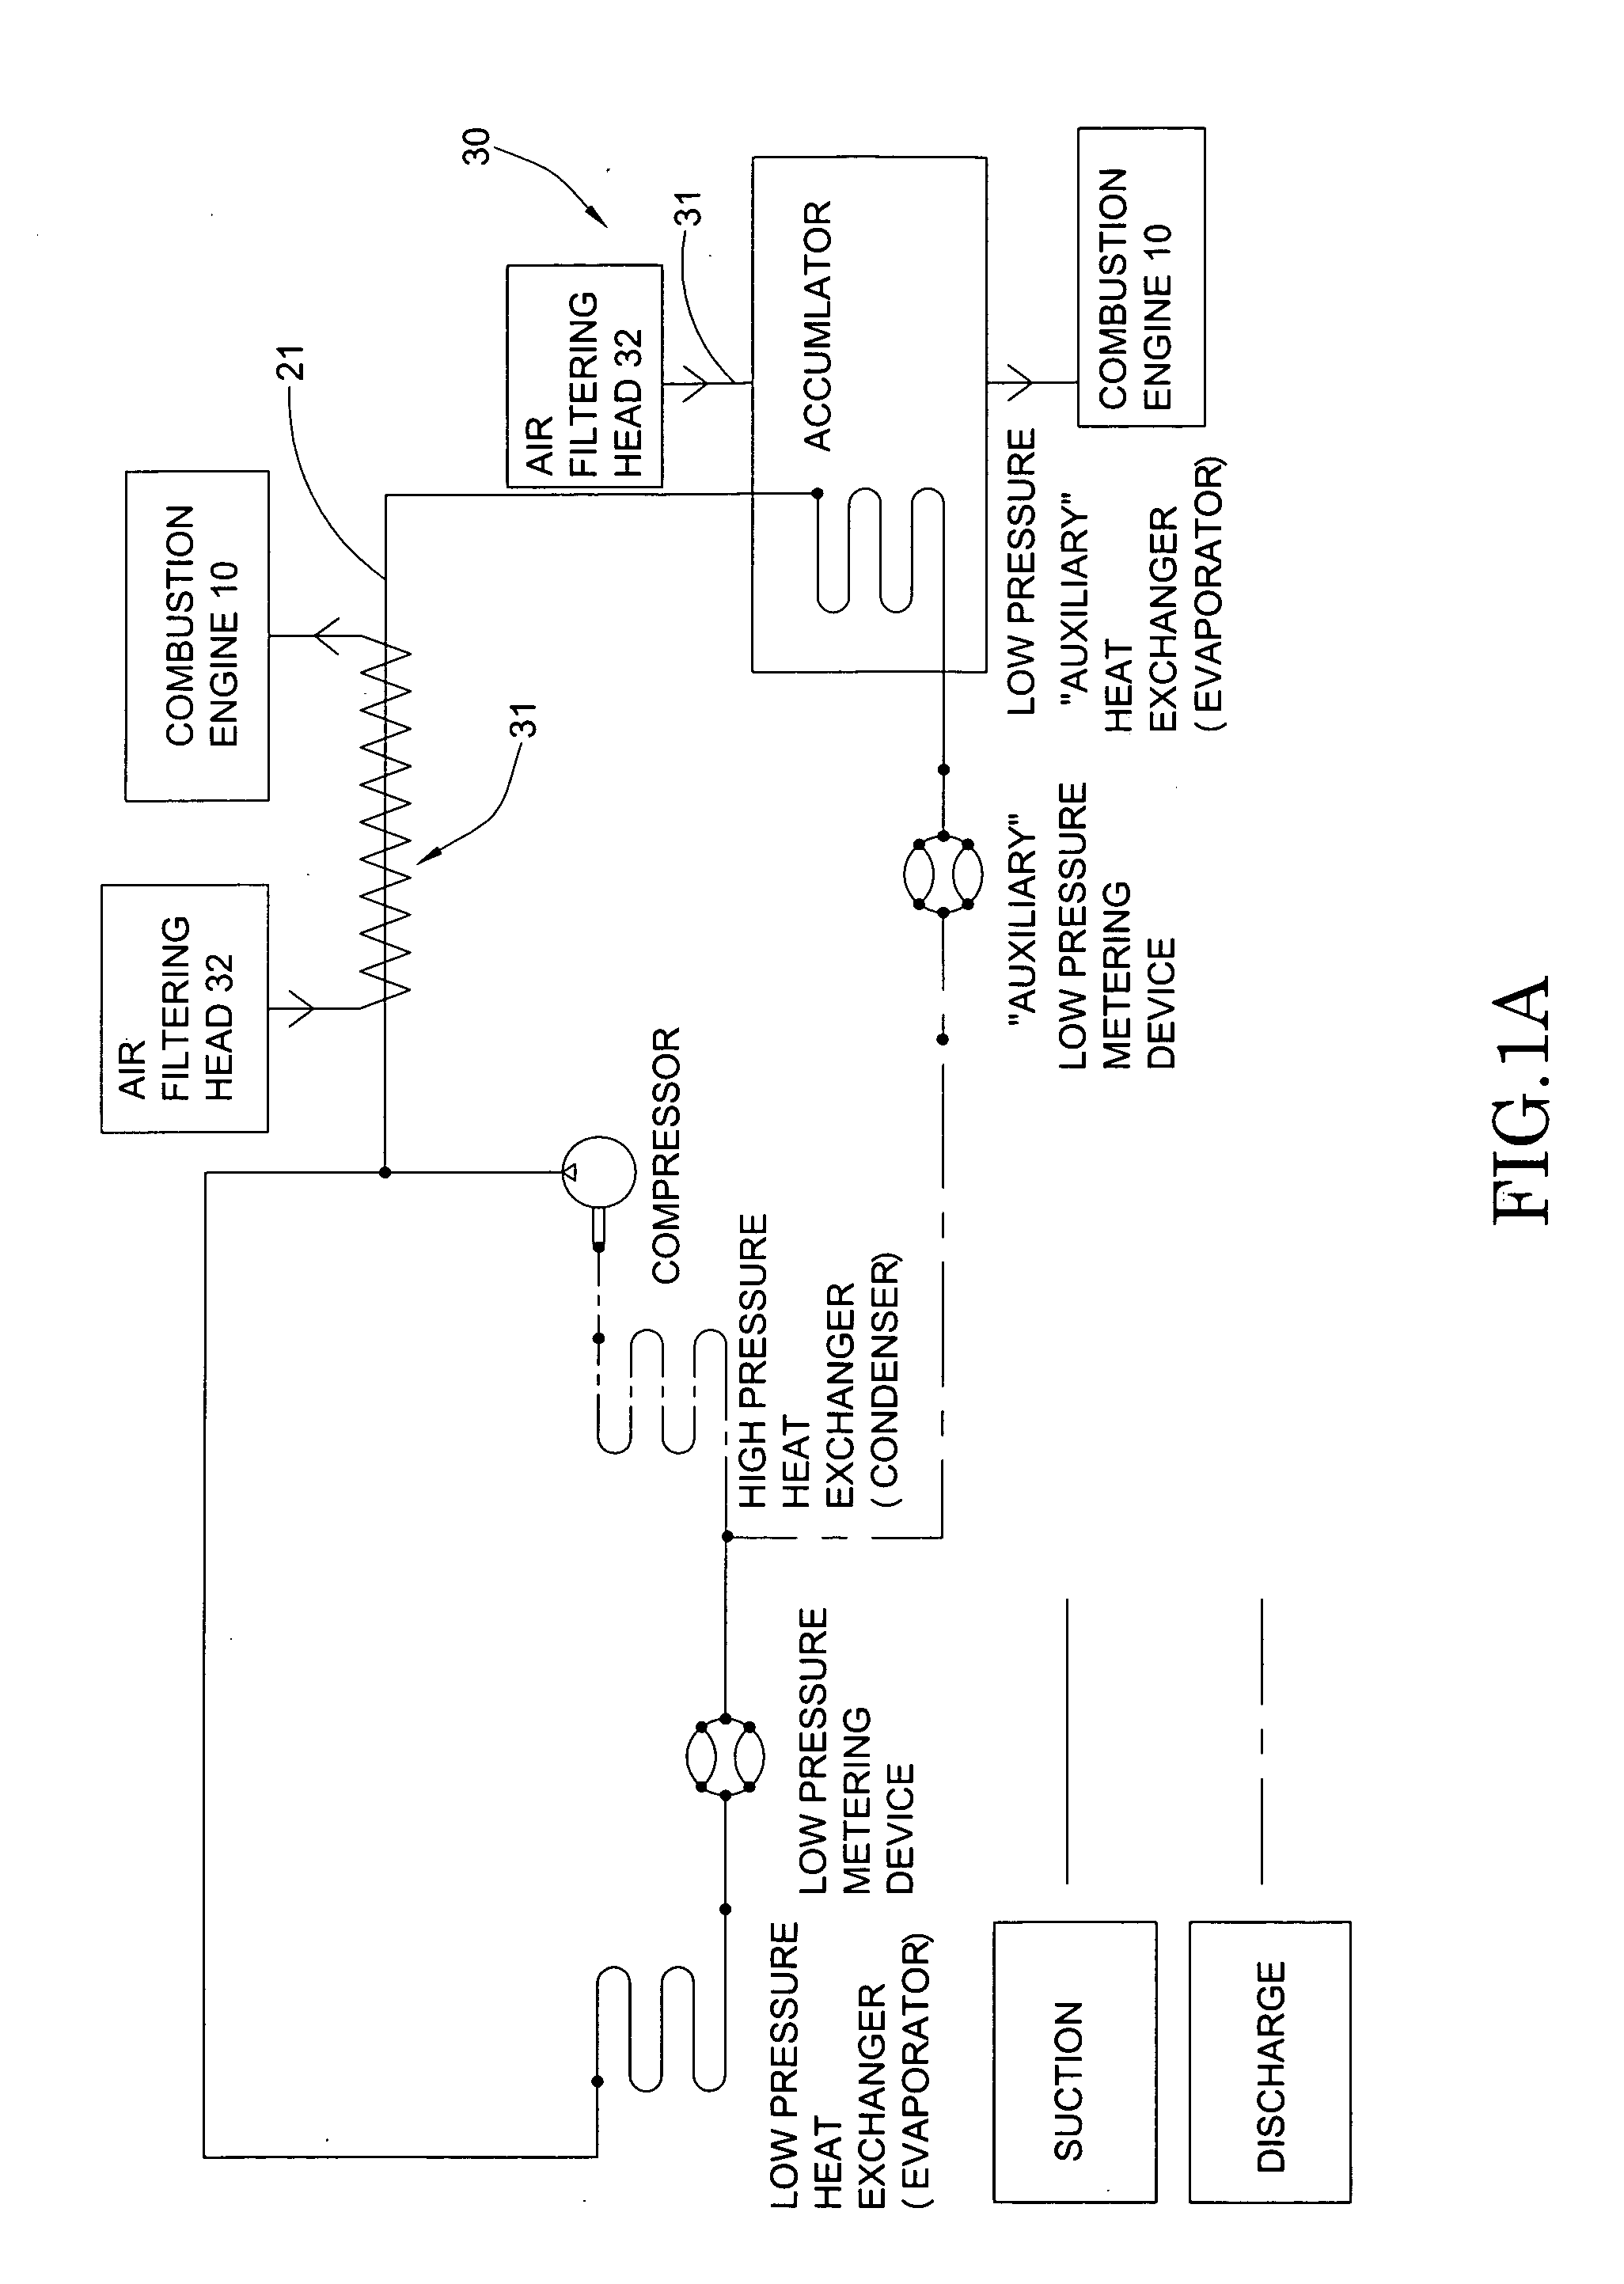 Intake enhancement system for a vehicle